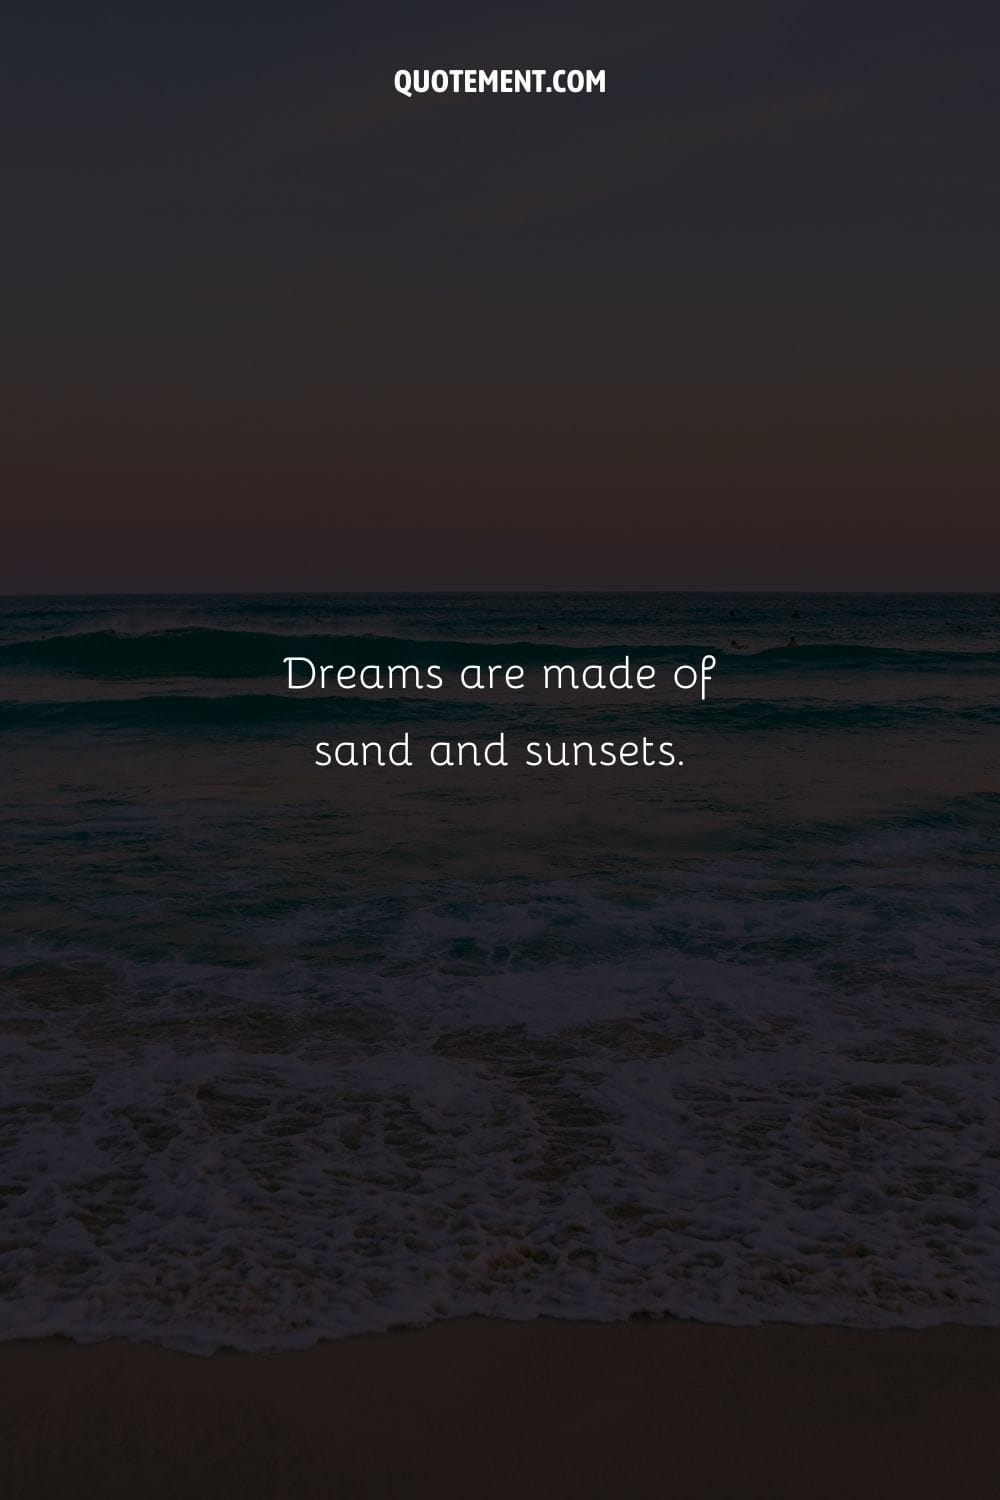 Dreams are made of sand and sunsets.